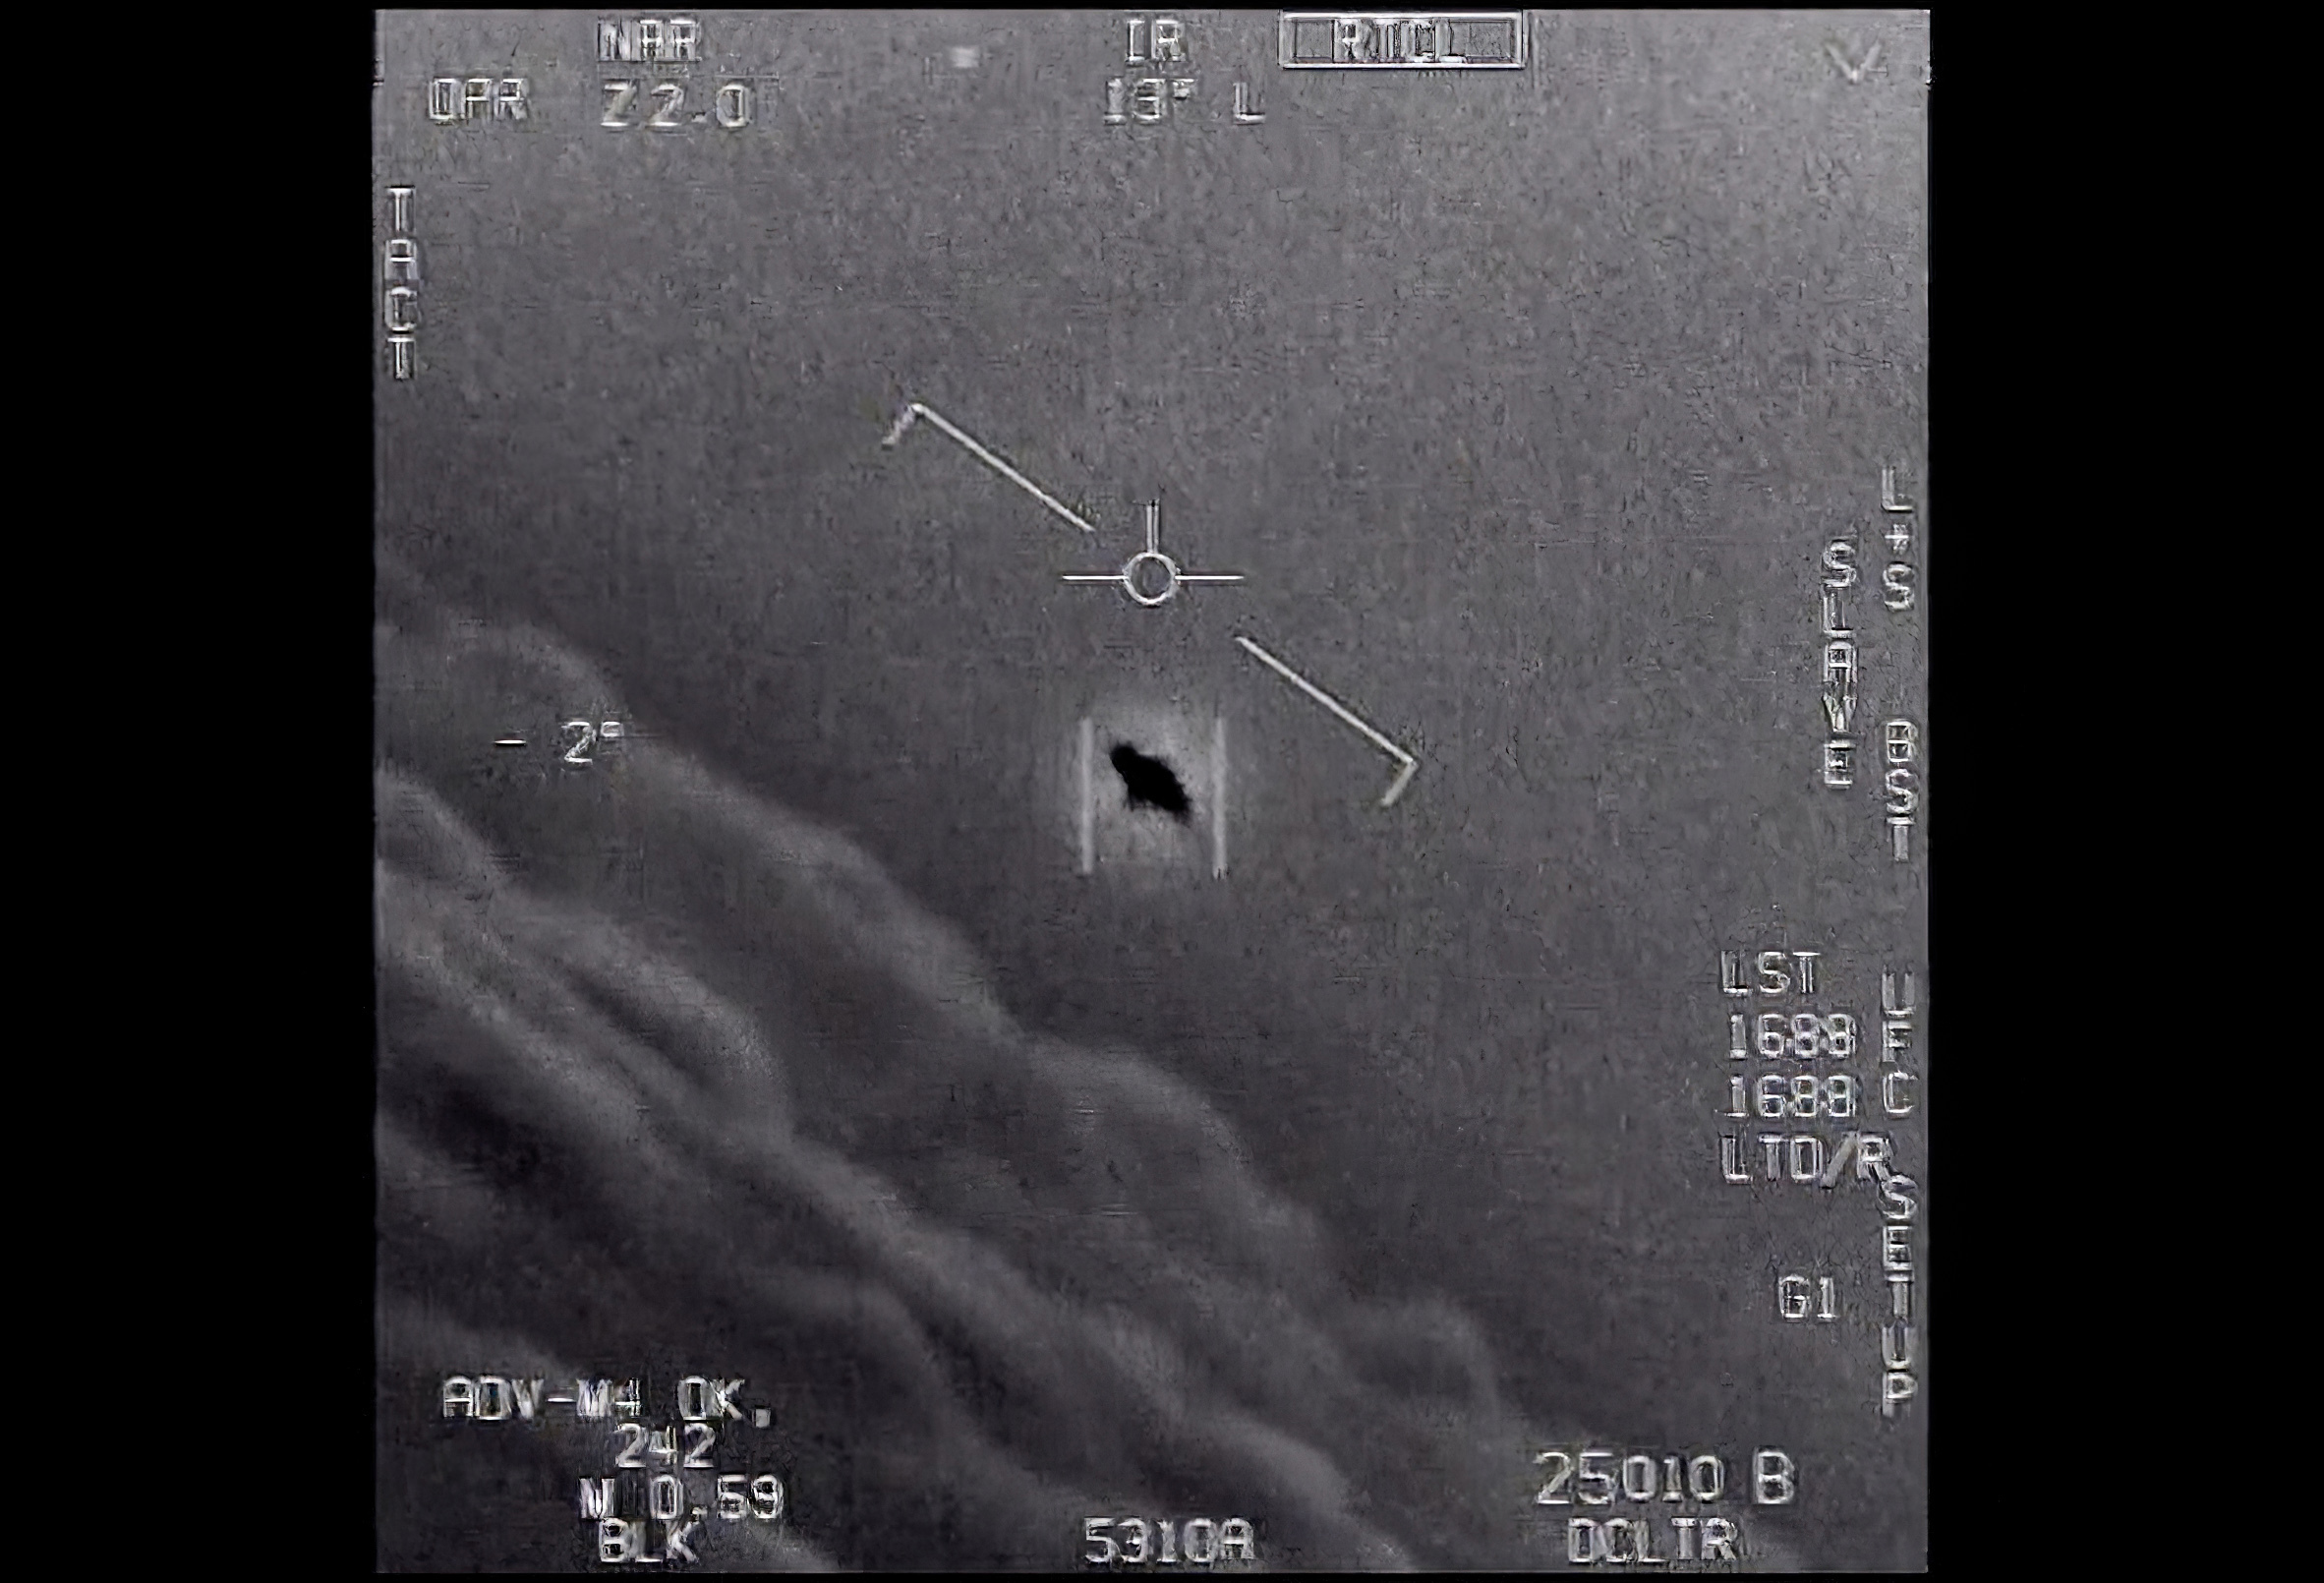 PHOTO: The image from video provided by the Department of Defense labelled Gimbal, from 2015, an unexplained object is seen at center as it is tracked as it soars high along the clouds, traveling against the wind.